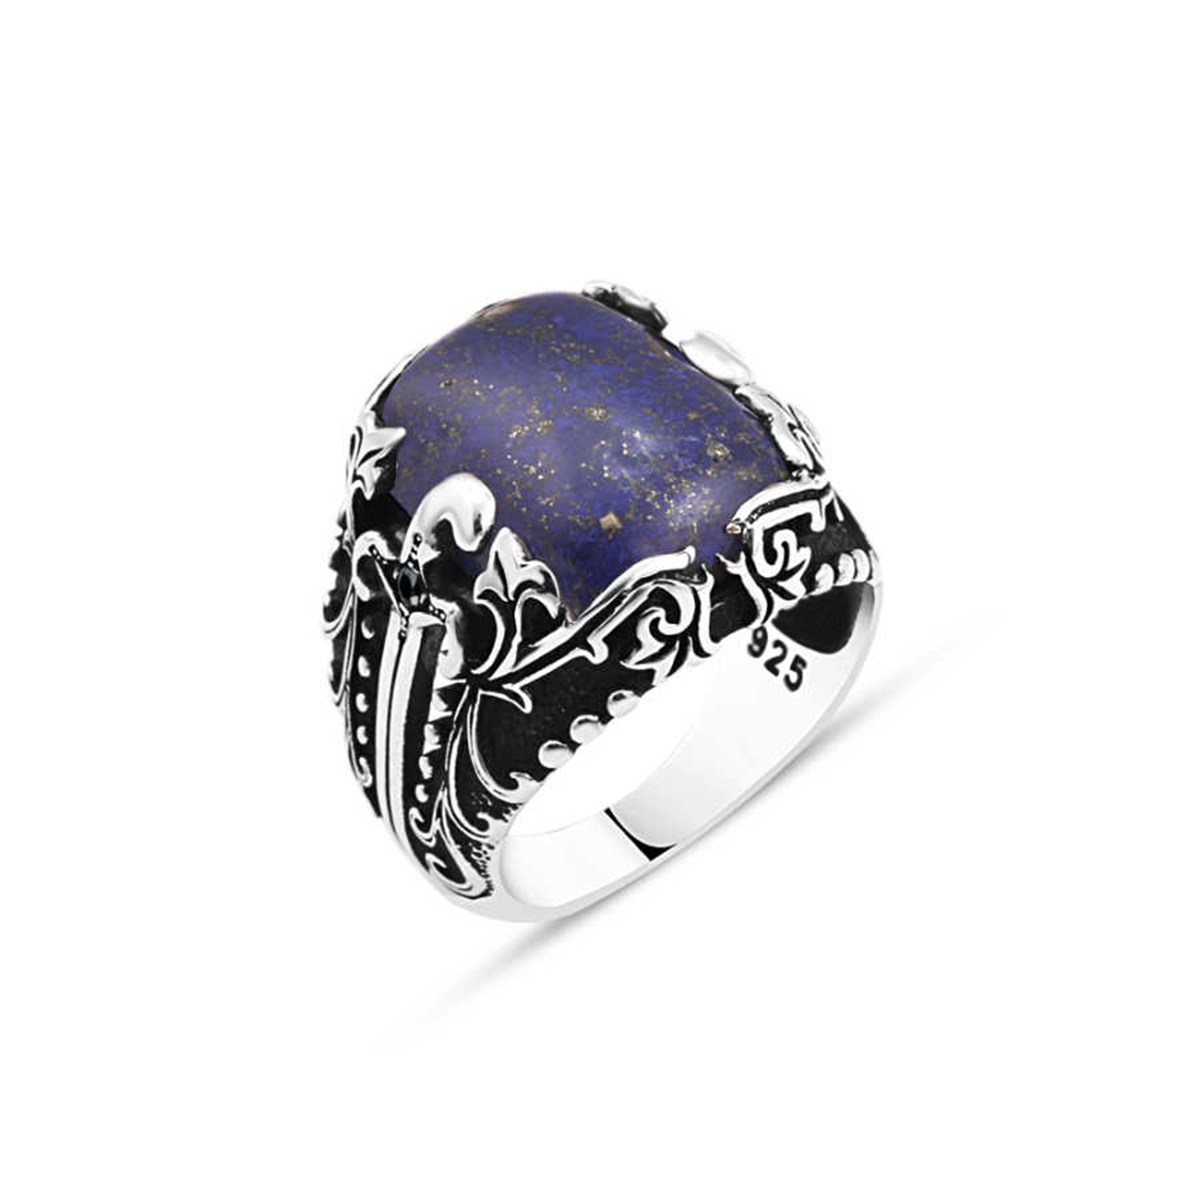 Squeezed Lapis Stone Silver Men's Ring